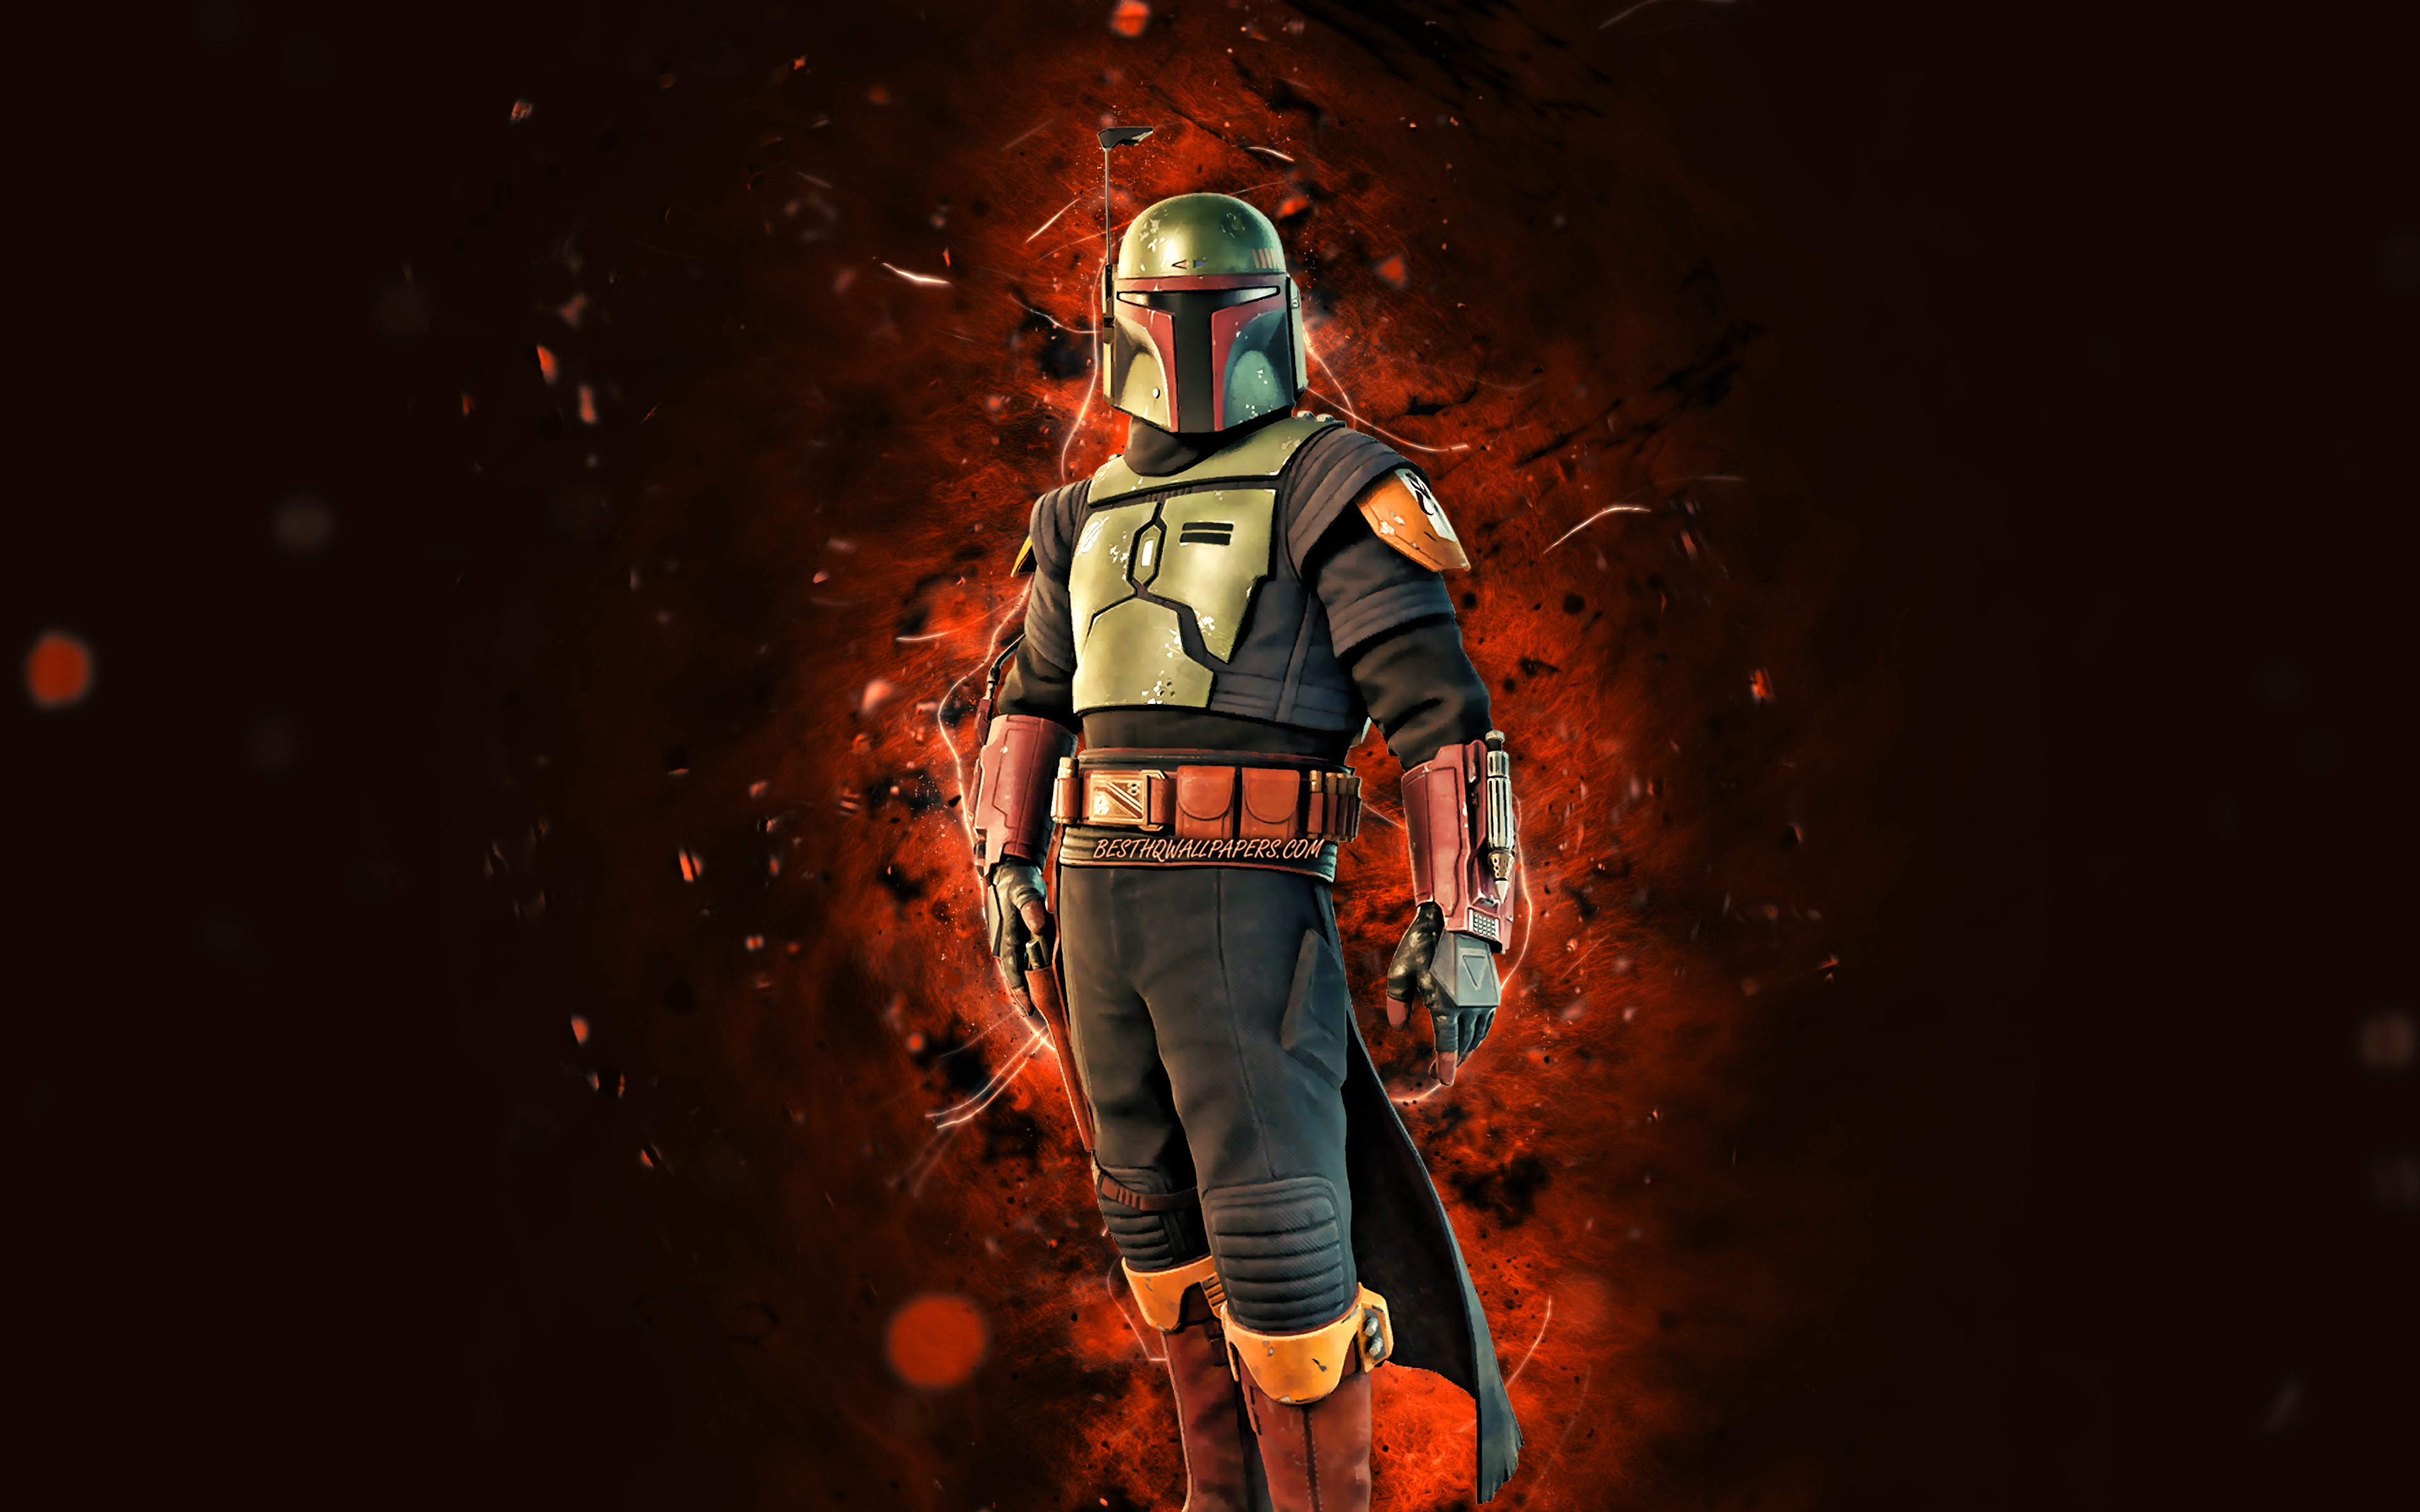 Download wallpapers Boba Fett, 4k, orange neon lights, Fortnite Battle  Royale, Fortnite characters, Boba Fett Skin, Fortnite, Boba Fett Fortnite  for desktop with resolution 1024x1024. High Quality HD pictures wallpapers